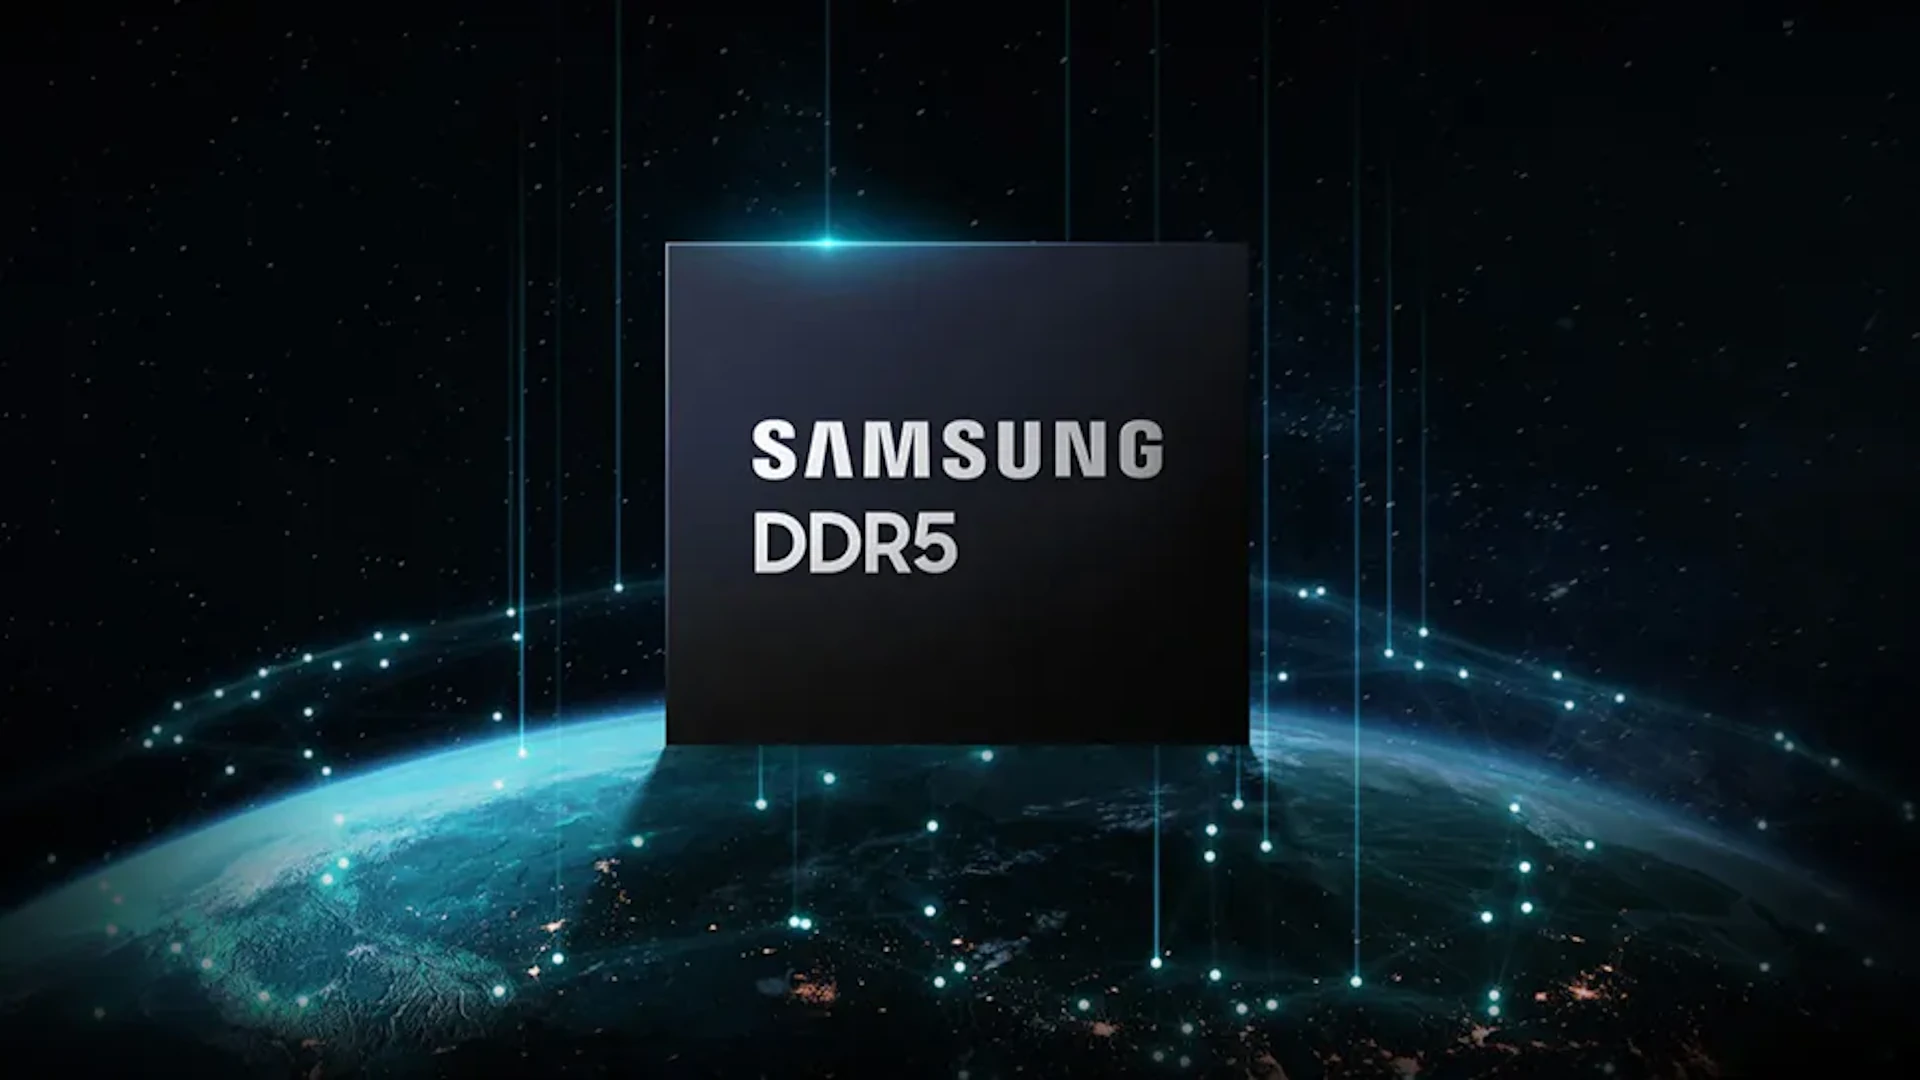 Samsung will introduce a superfast DDR5 chip most likely at the IEEE conference this year